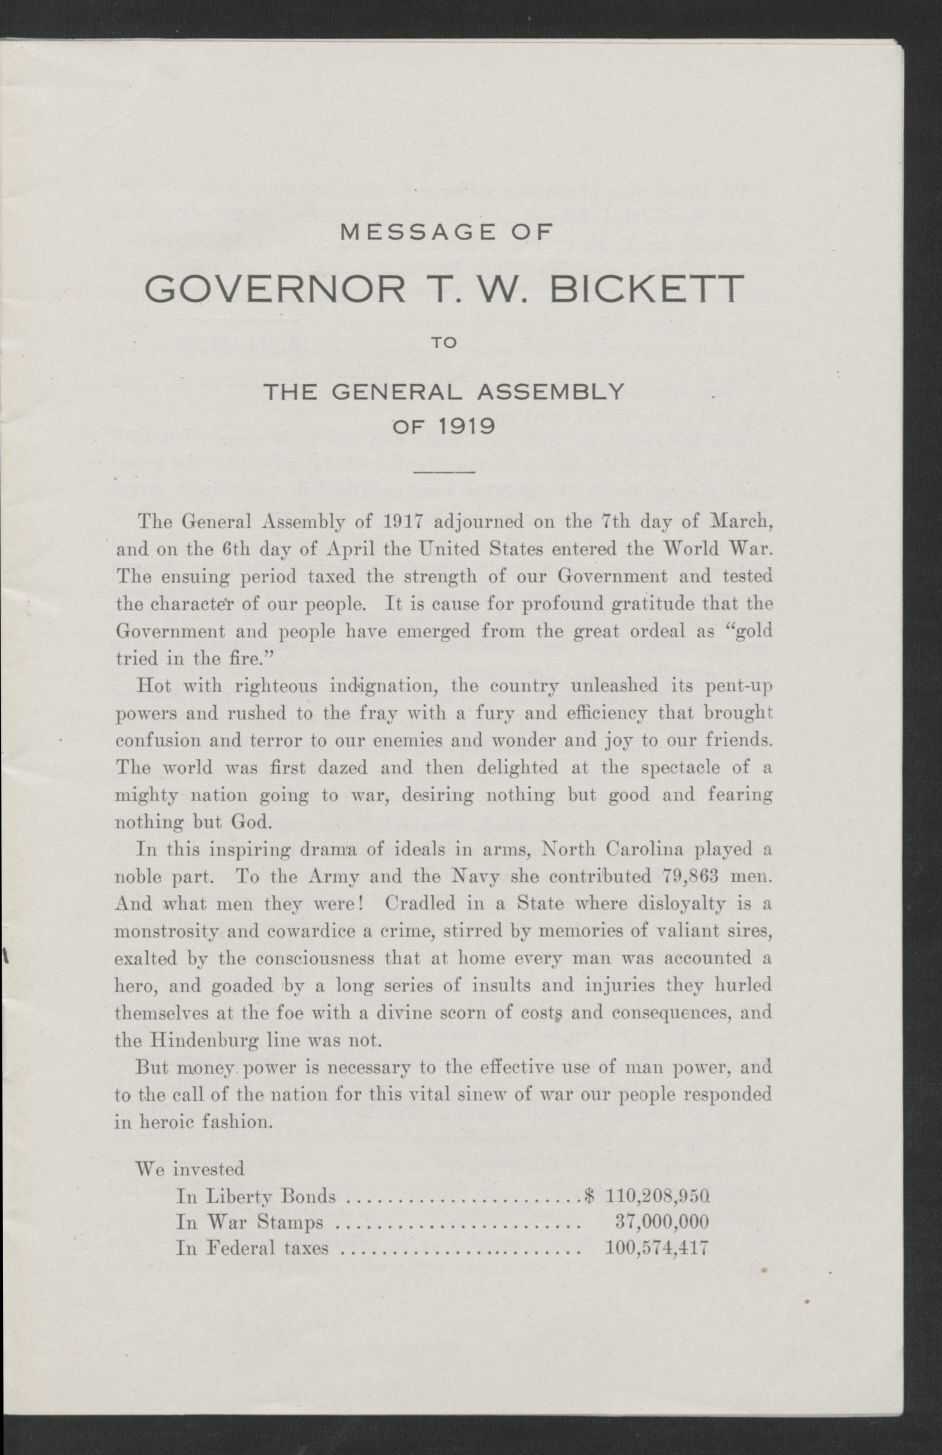 Biennial Message of Governor Thomas W. Bickett to the General Assembly, January 9, 1919, page 1